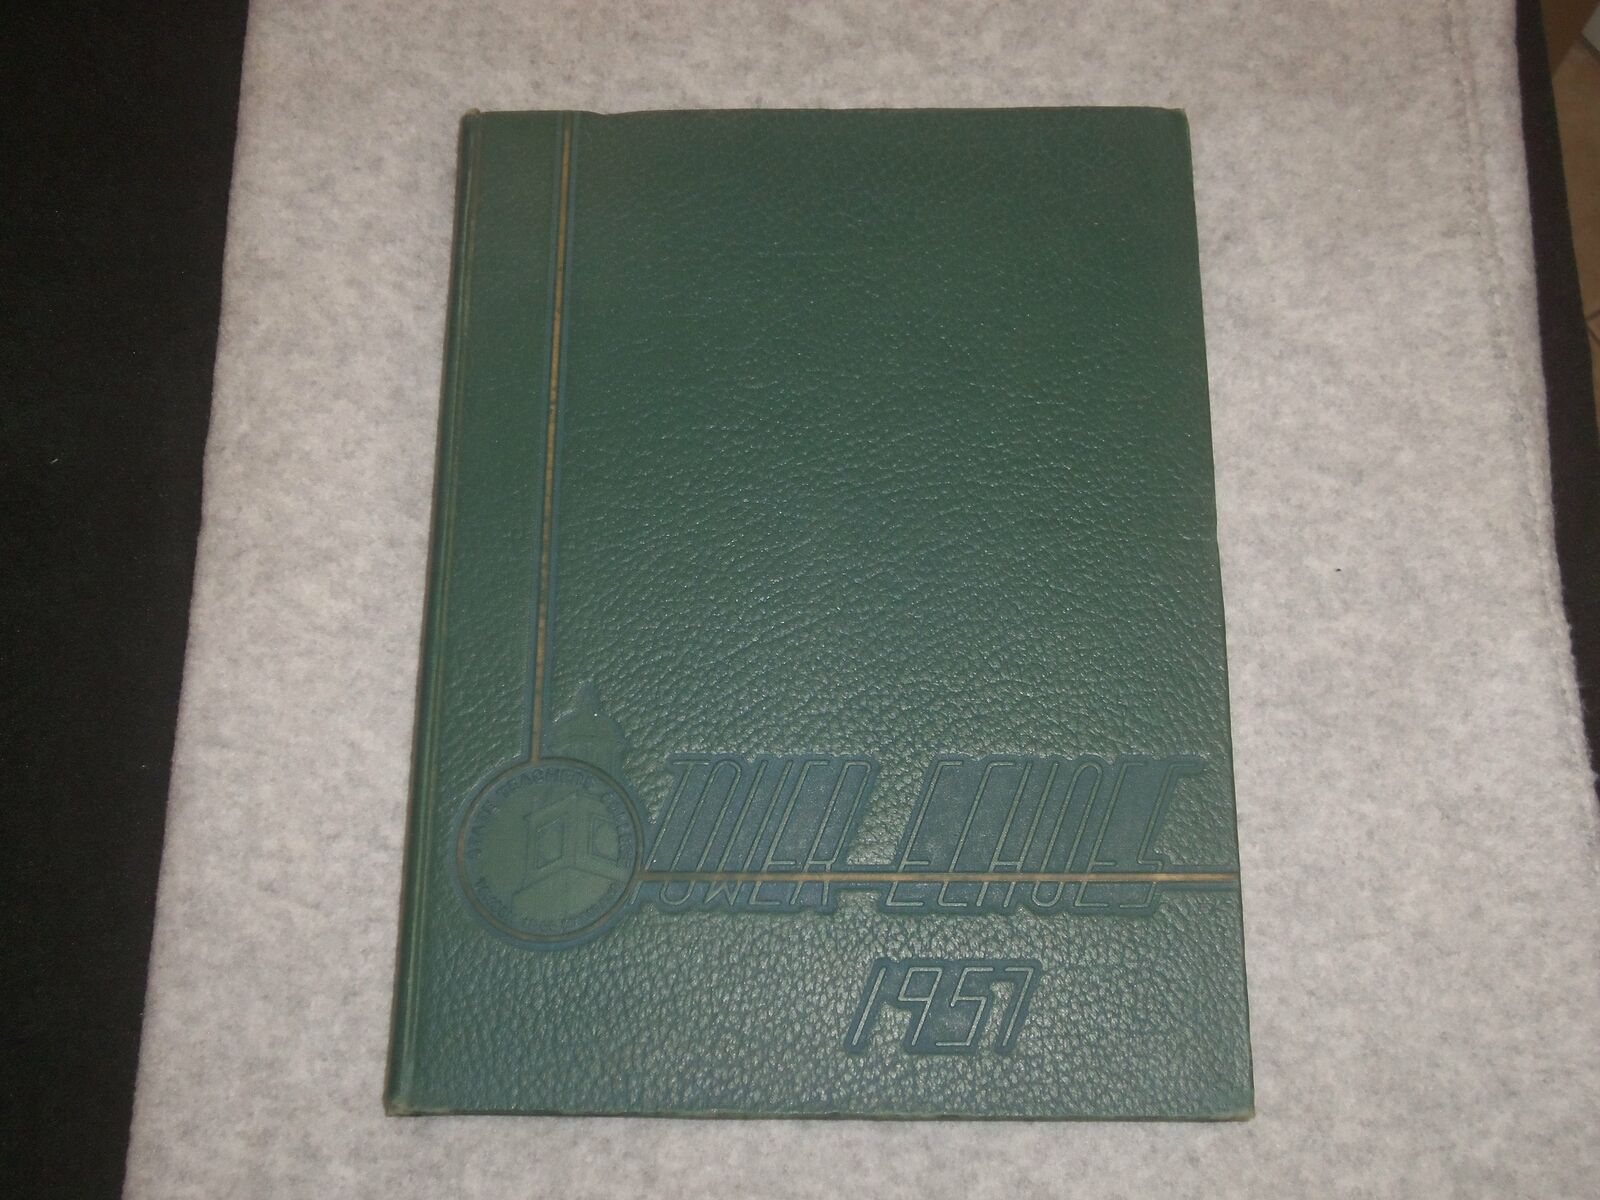 1957 STATE TEACHERS COLLEGE YEARBOOK - TOWSON, MARYLAND - YB 2180